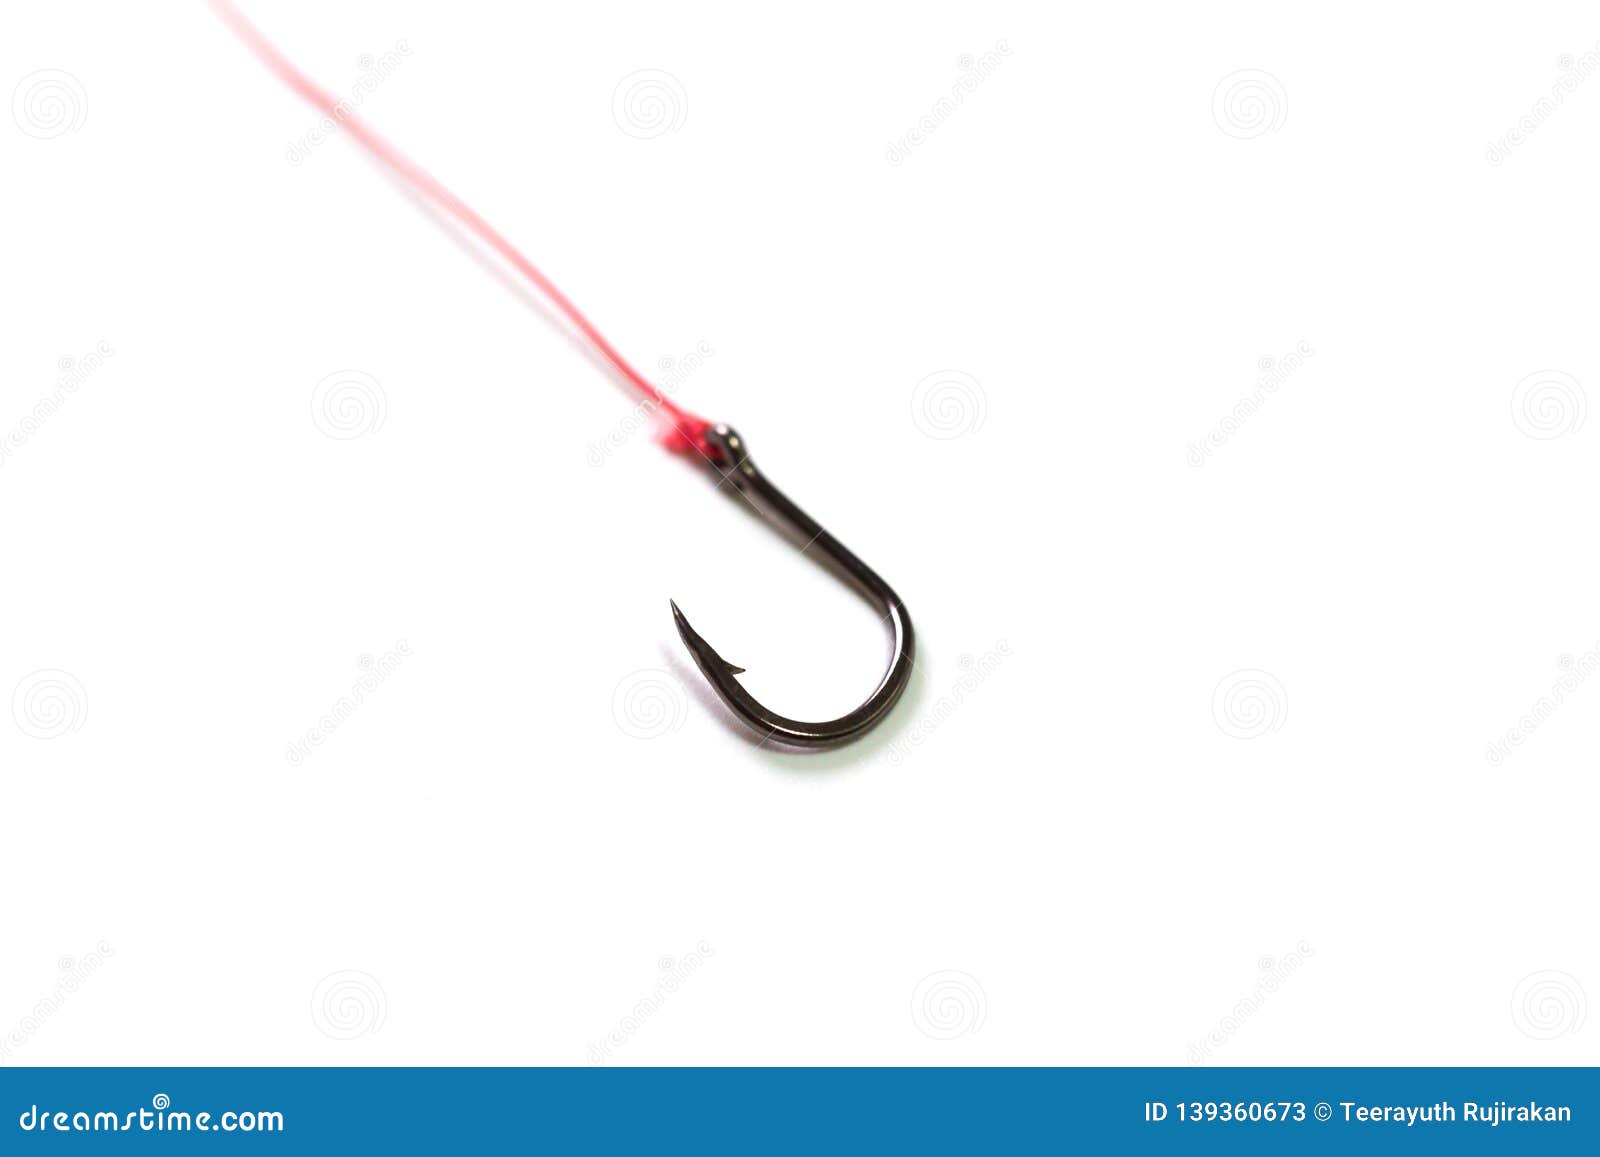 https://thumbs.dreamstime.com/z/isolated-sharp-hook-fishing-line-white-background-closeup-macro-photography-139360673.jpg